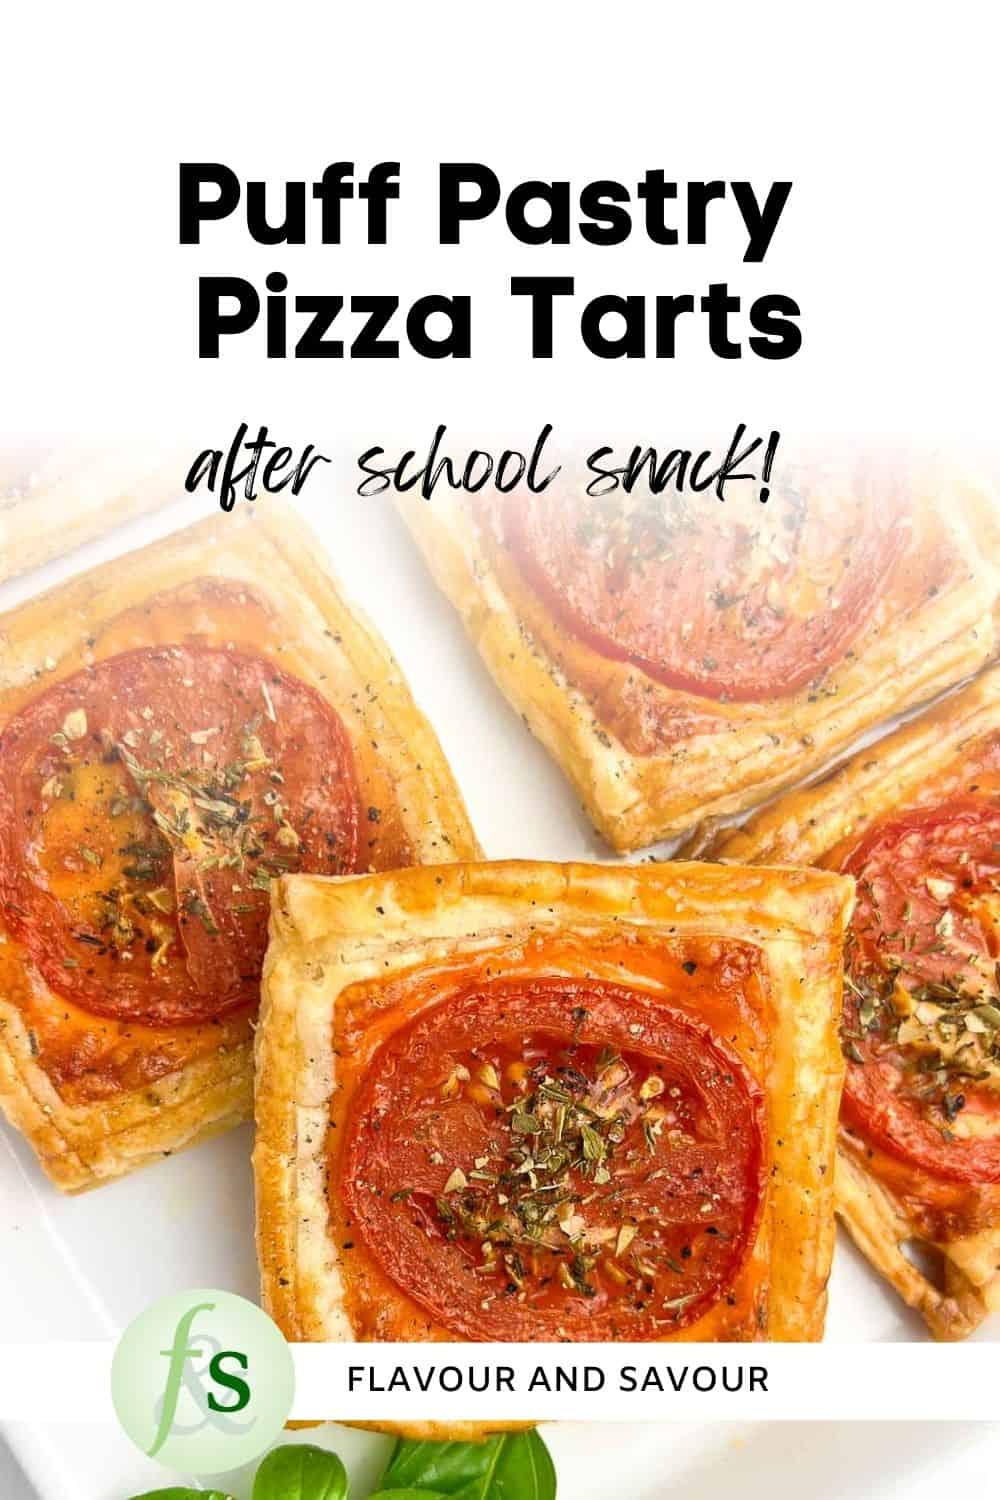 Image with text overlay for Puff Pastry Pizza Tarts.{